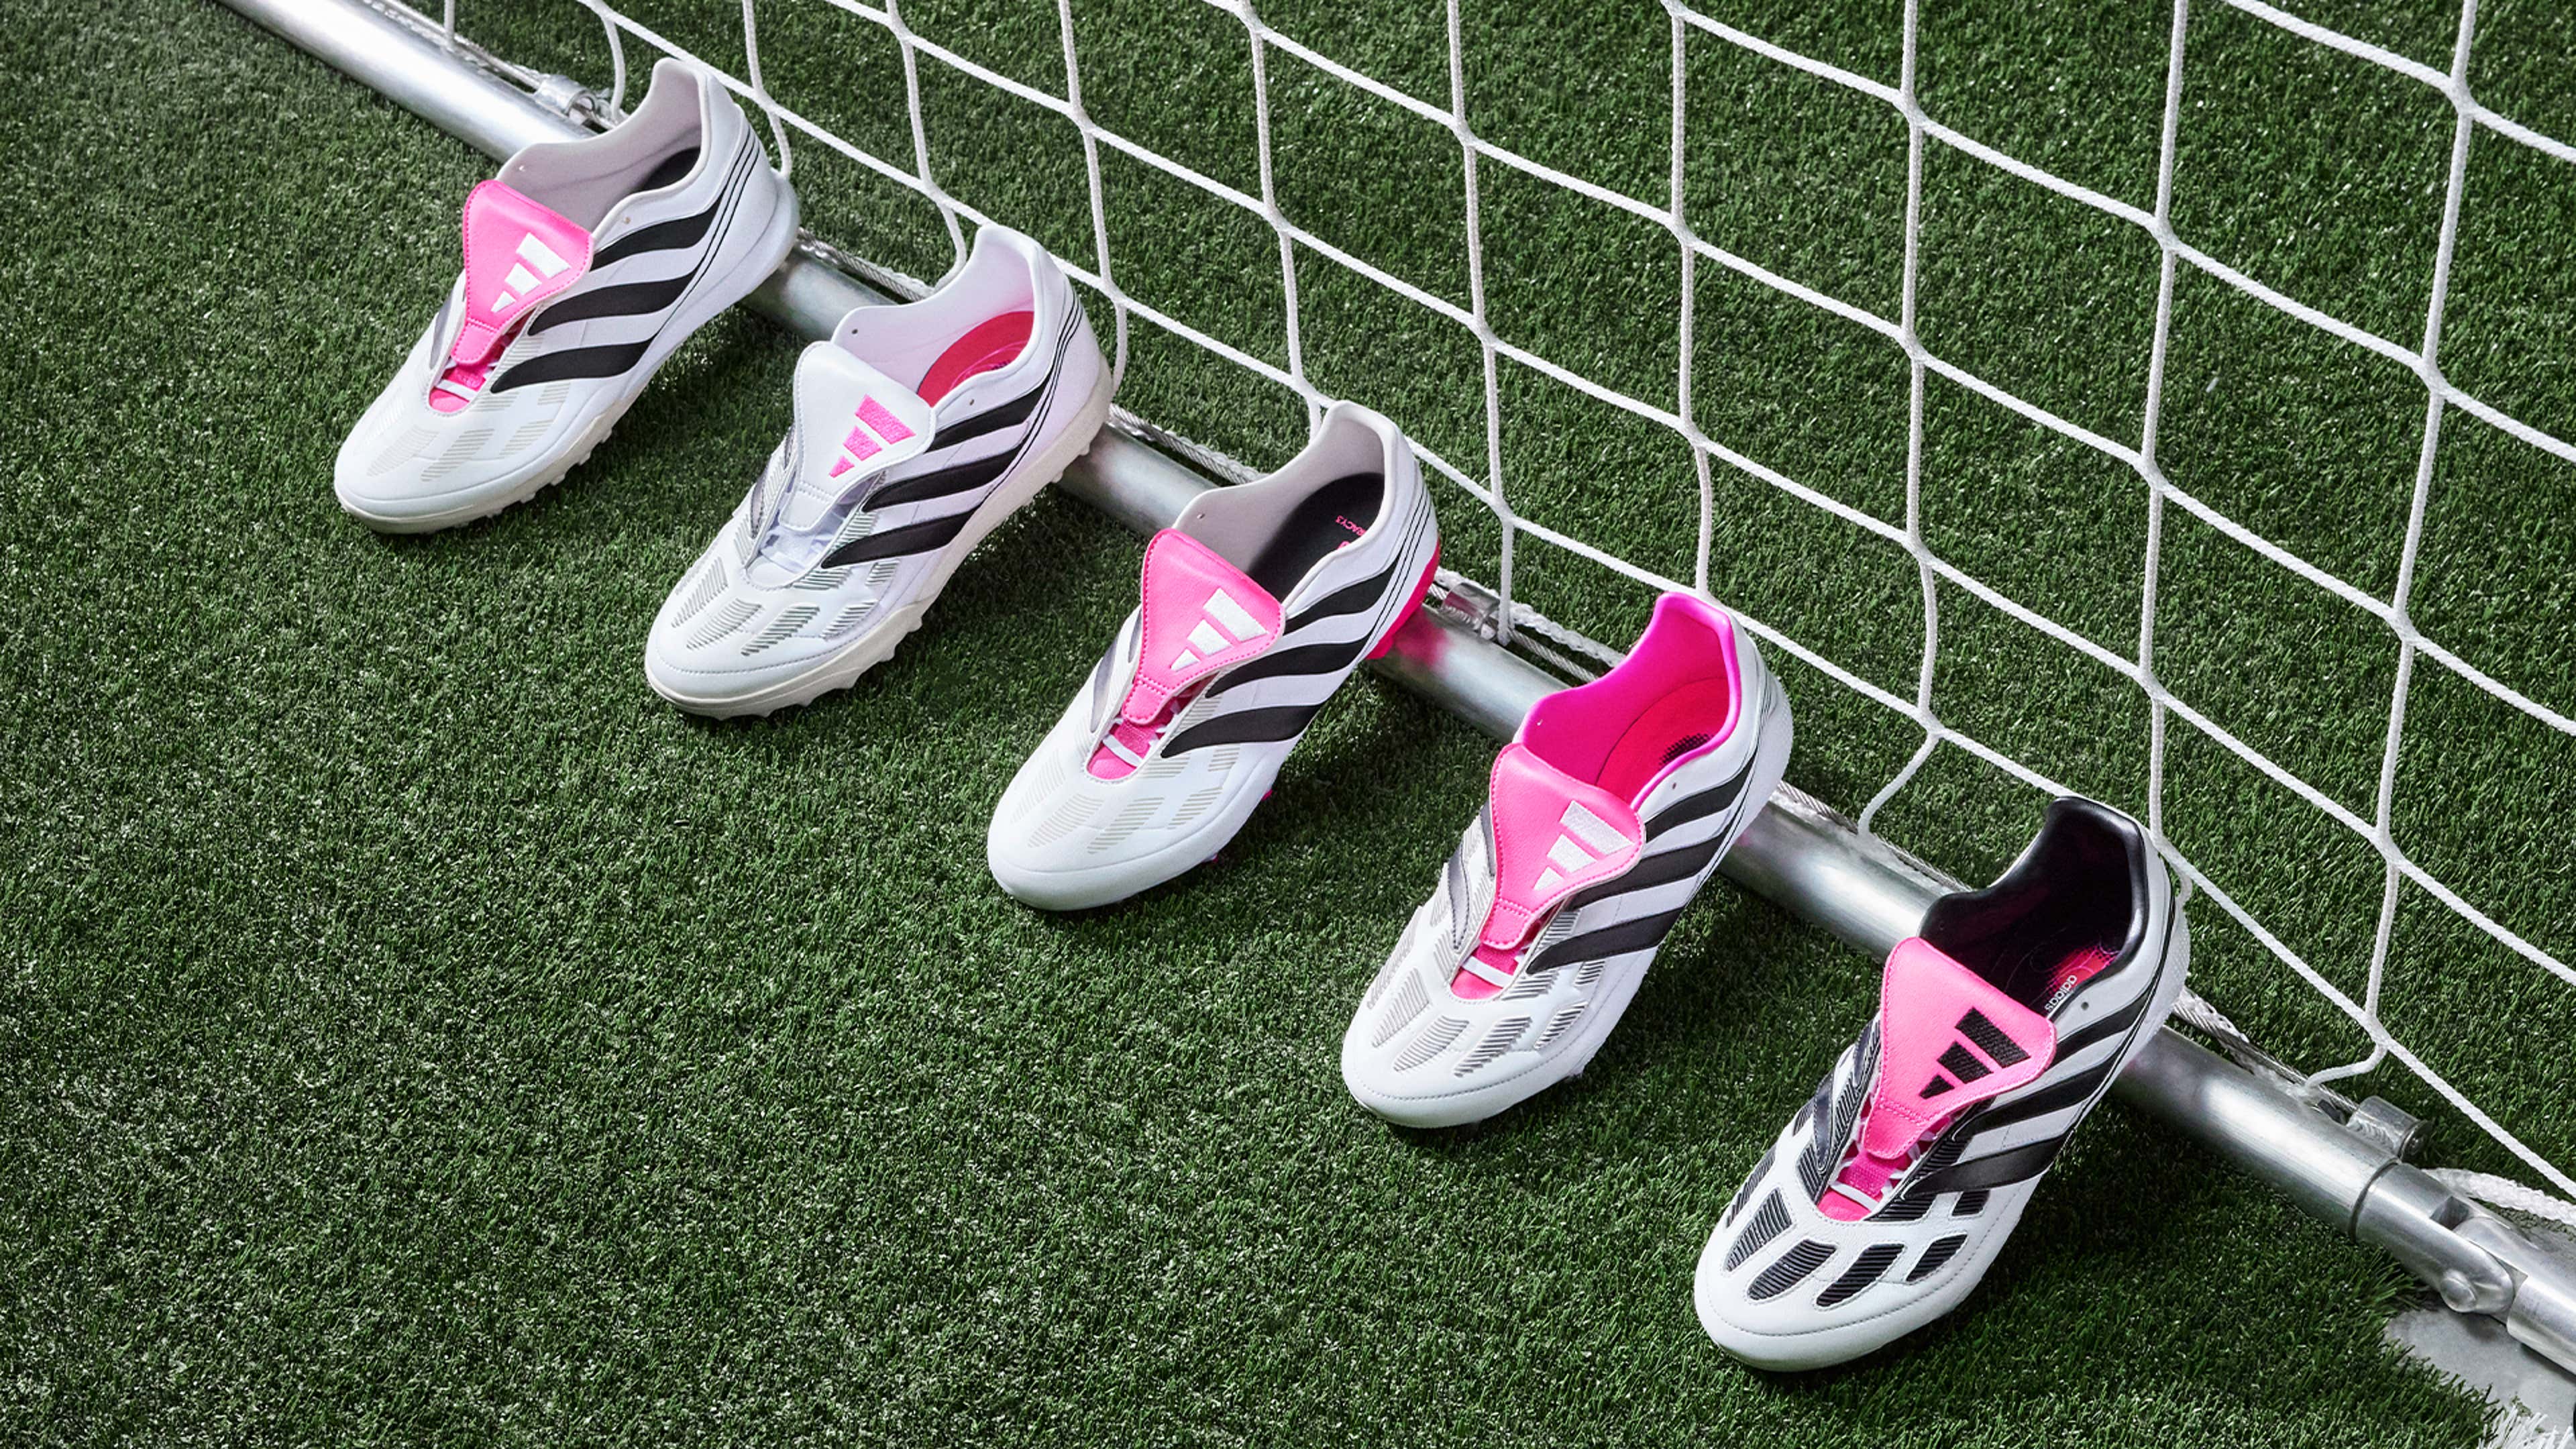 adidas bring the legacy of the Predator back to life with the Precision | Goal.com US